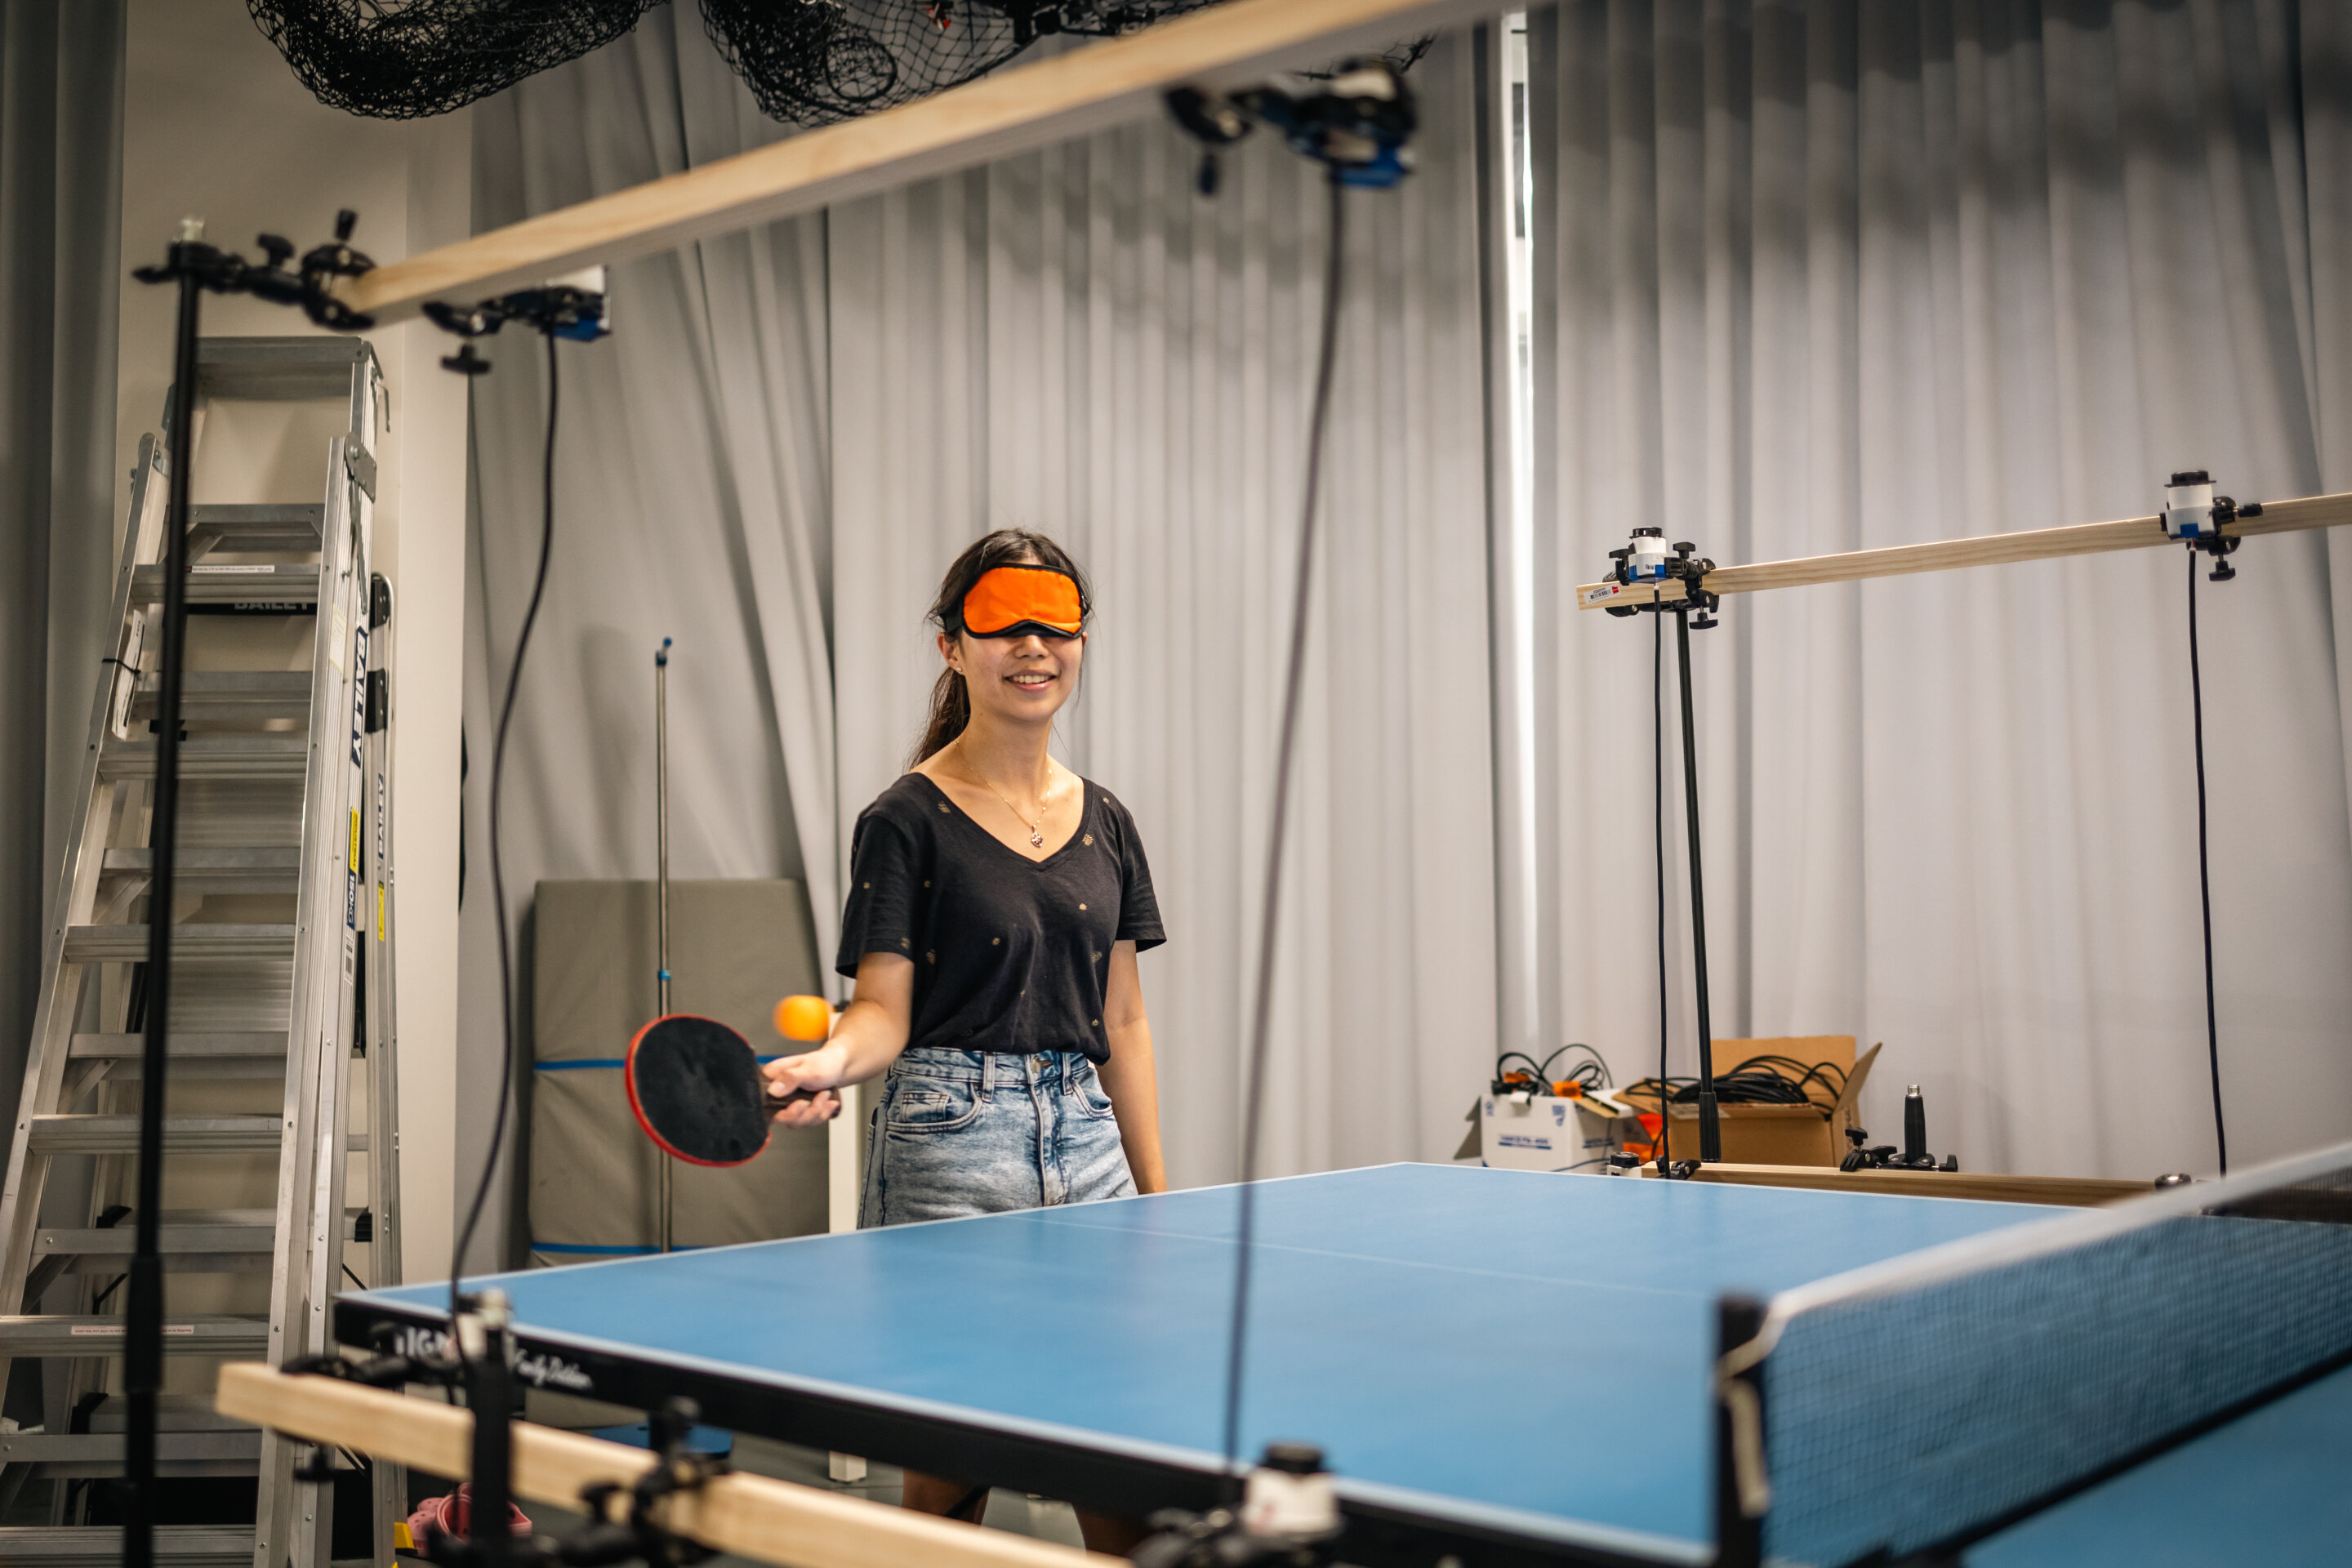 Making table tennis accessible for blind players